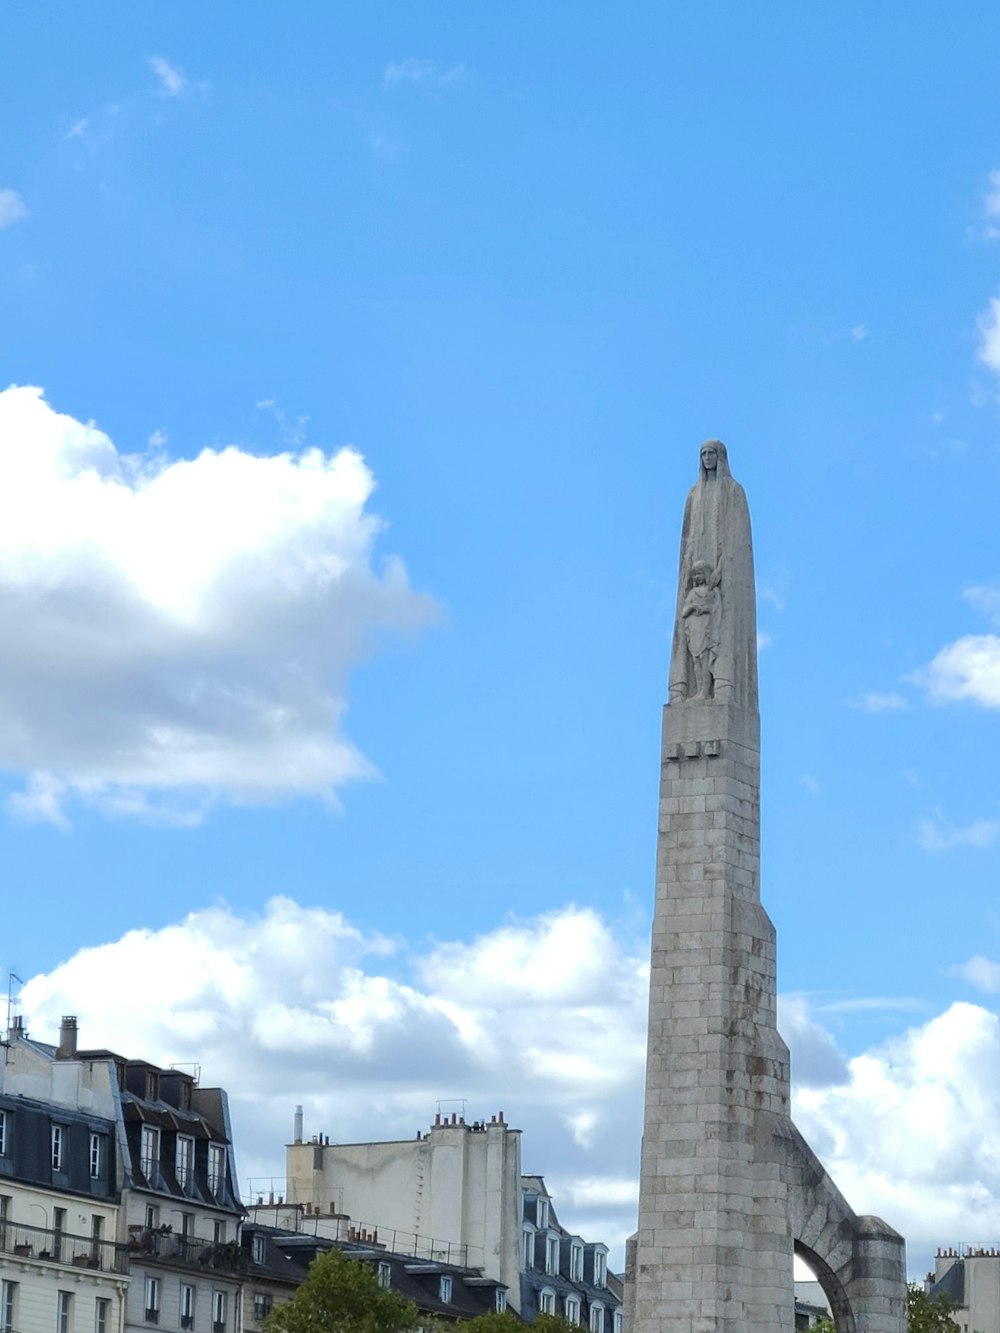 a tall monument in the middle of a city